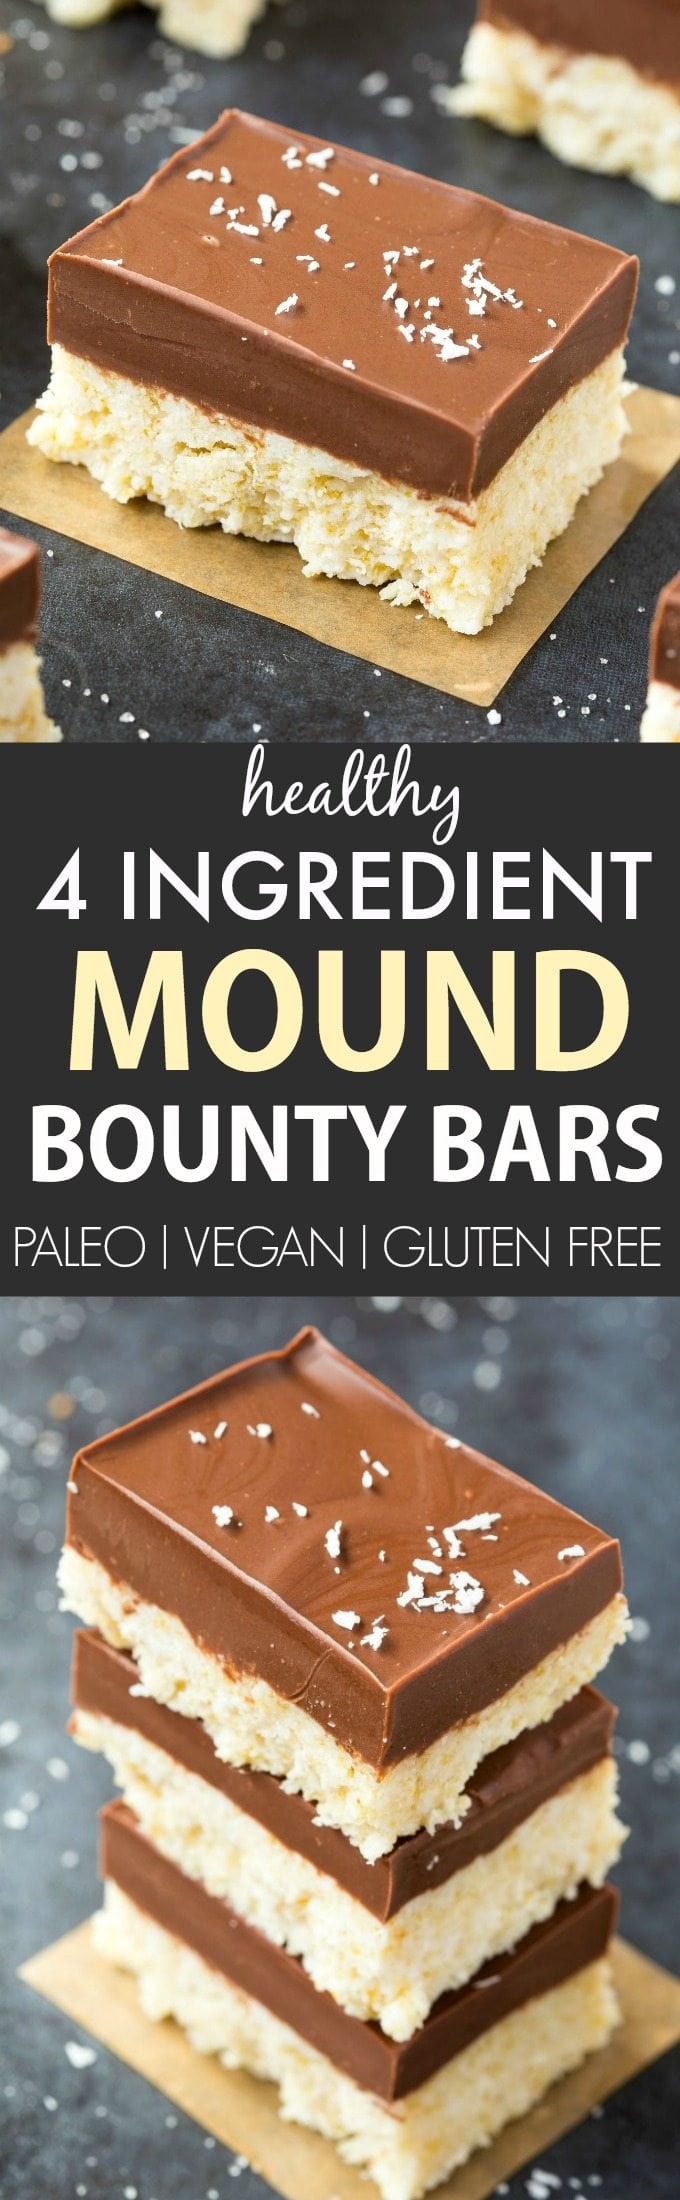 4 Ingredient No Bake Mound Bounty Bars (V, GF, P, DF)- Easy, fuss-free and delicious, this healthy candy bar copycat combines coconut and chocolate in one! {vegan, gluten free, paleo recipe}- thebigmansworld.com